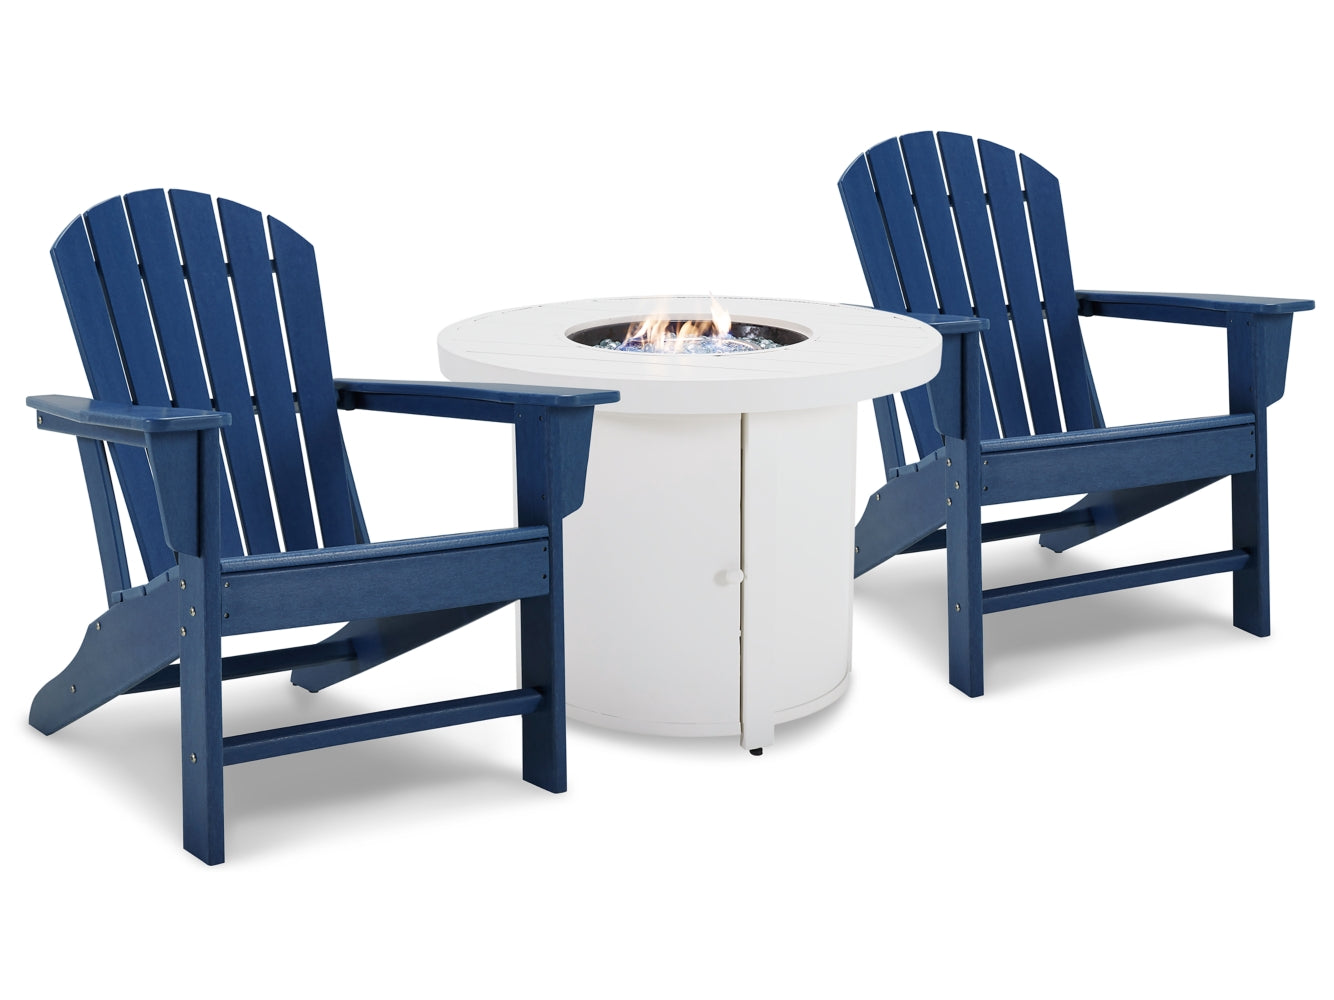 Sundown Treasure Fire Pit Table and 2 Chairs